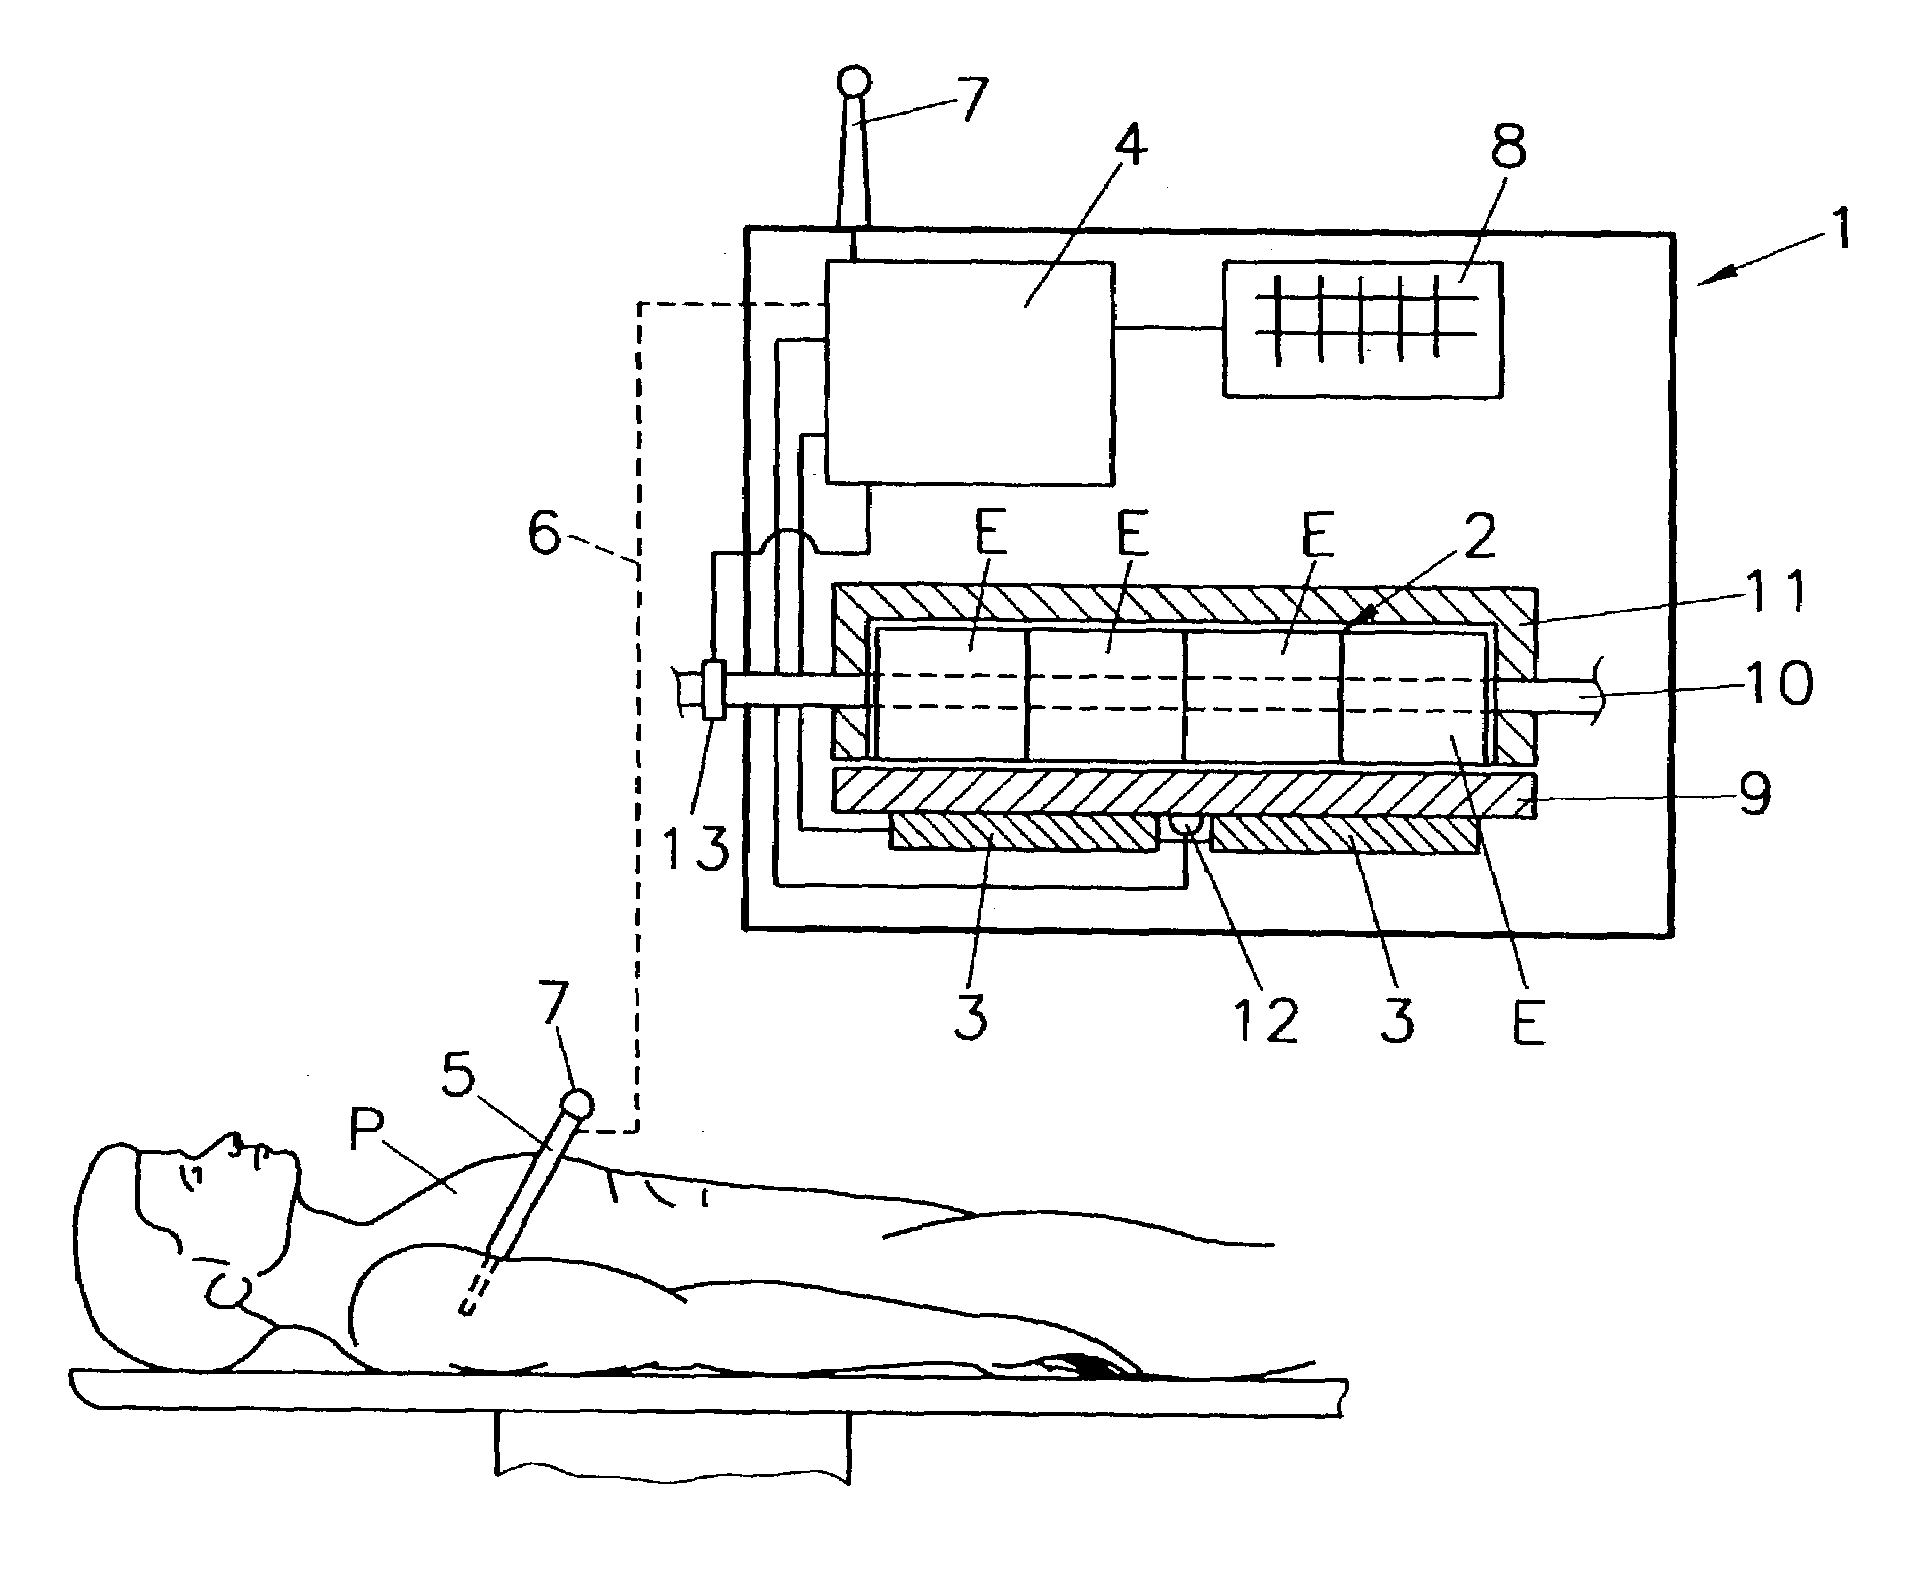 Method and device for measuring blood gas parameters